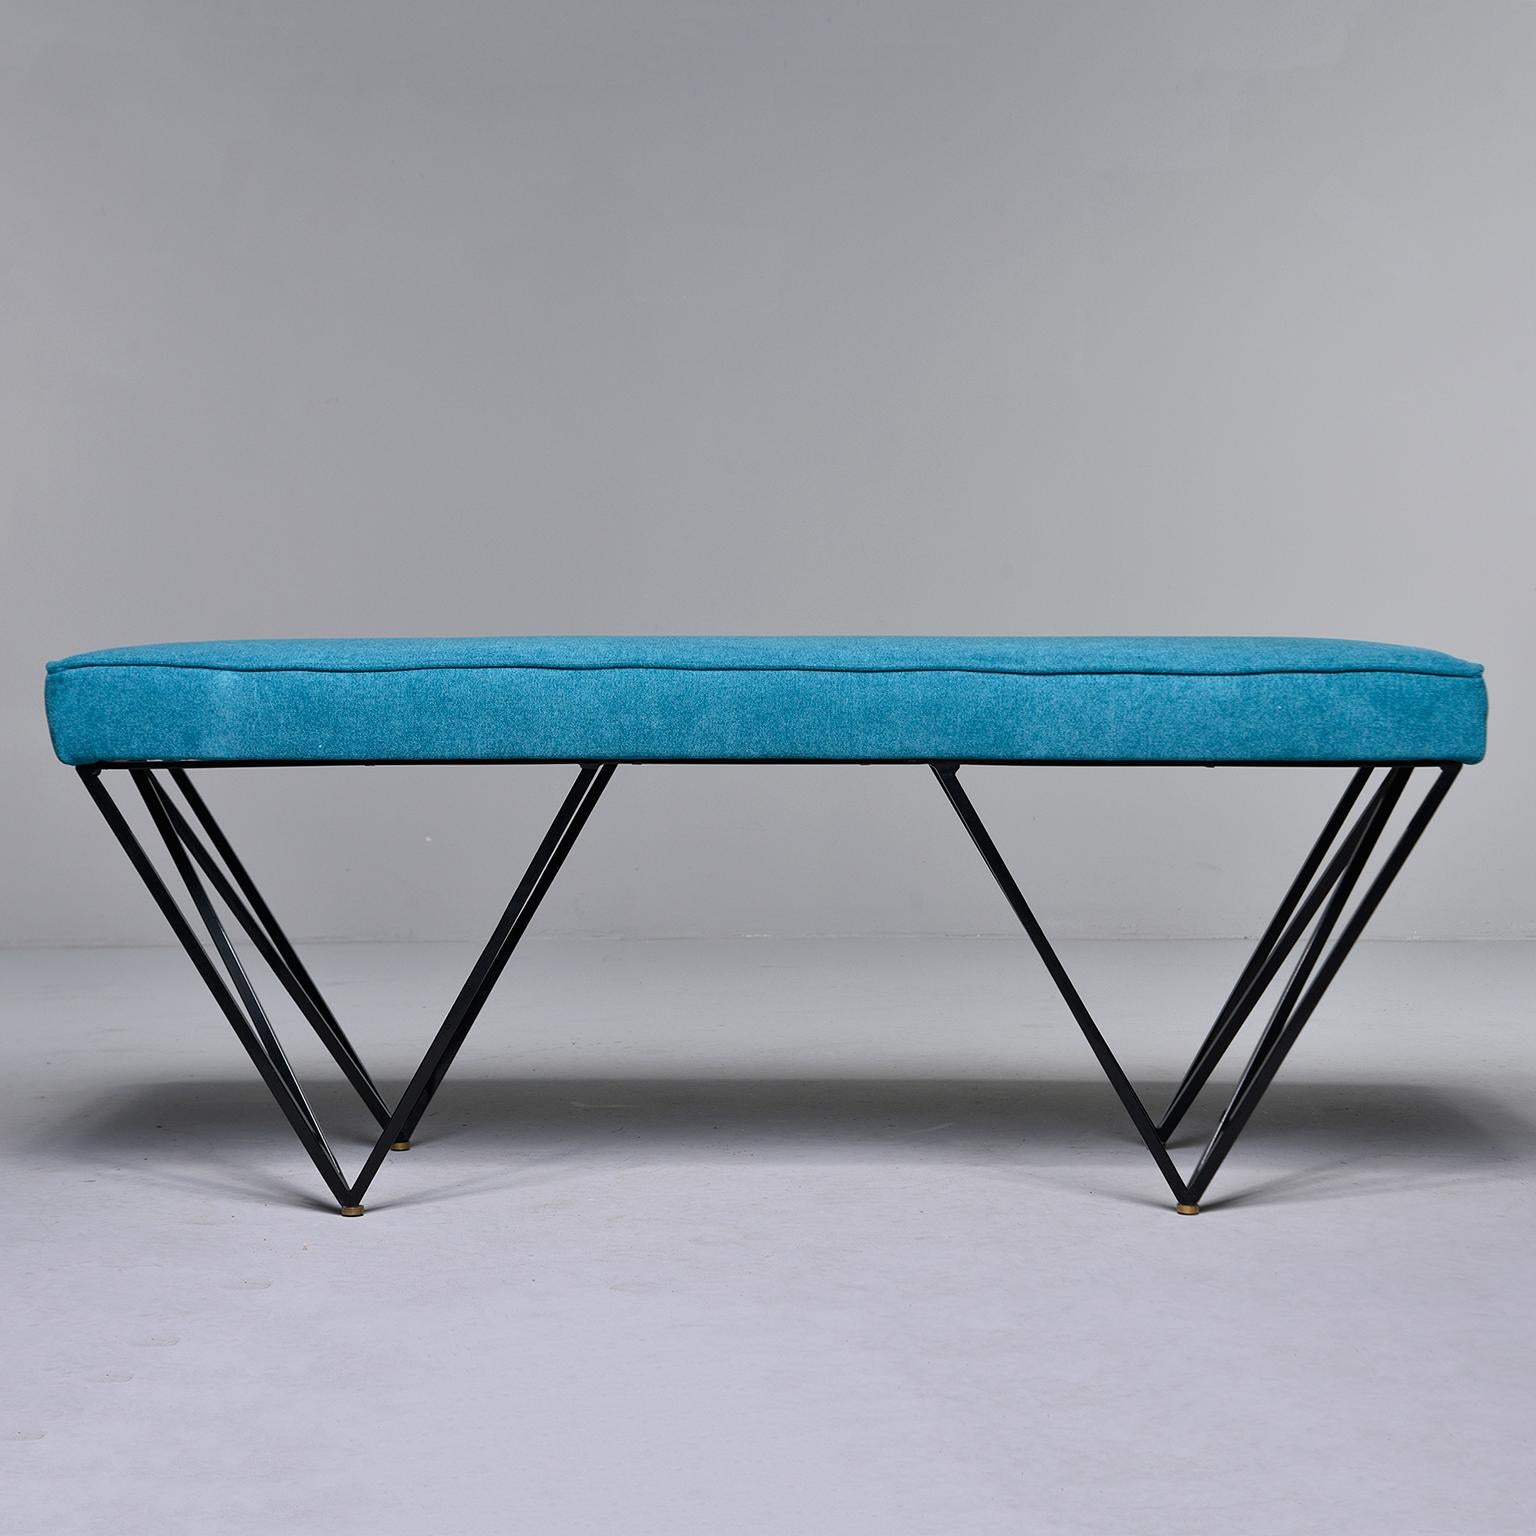 Mid-Century Modern Italian Midcentury Style Bench with Teal Fabric and Black Metal Legs